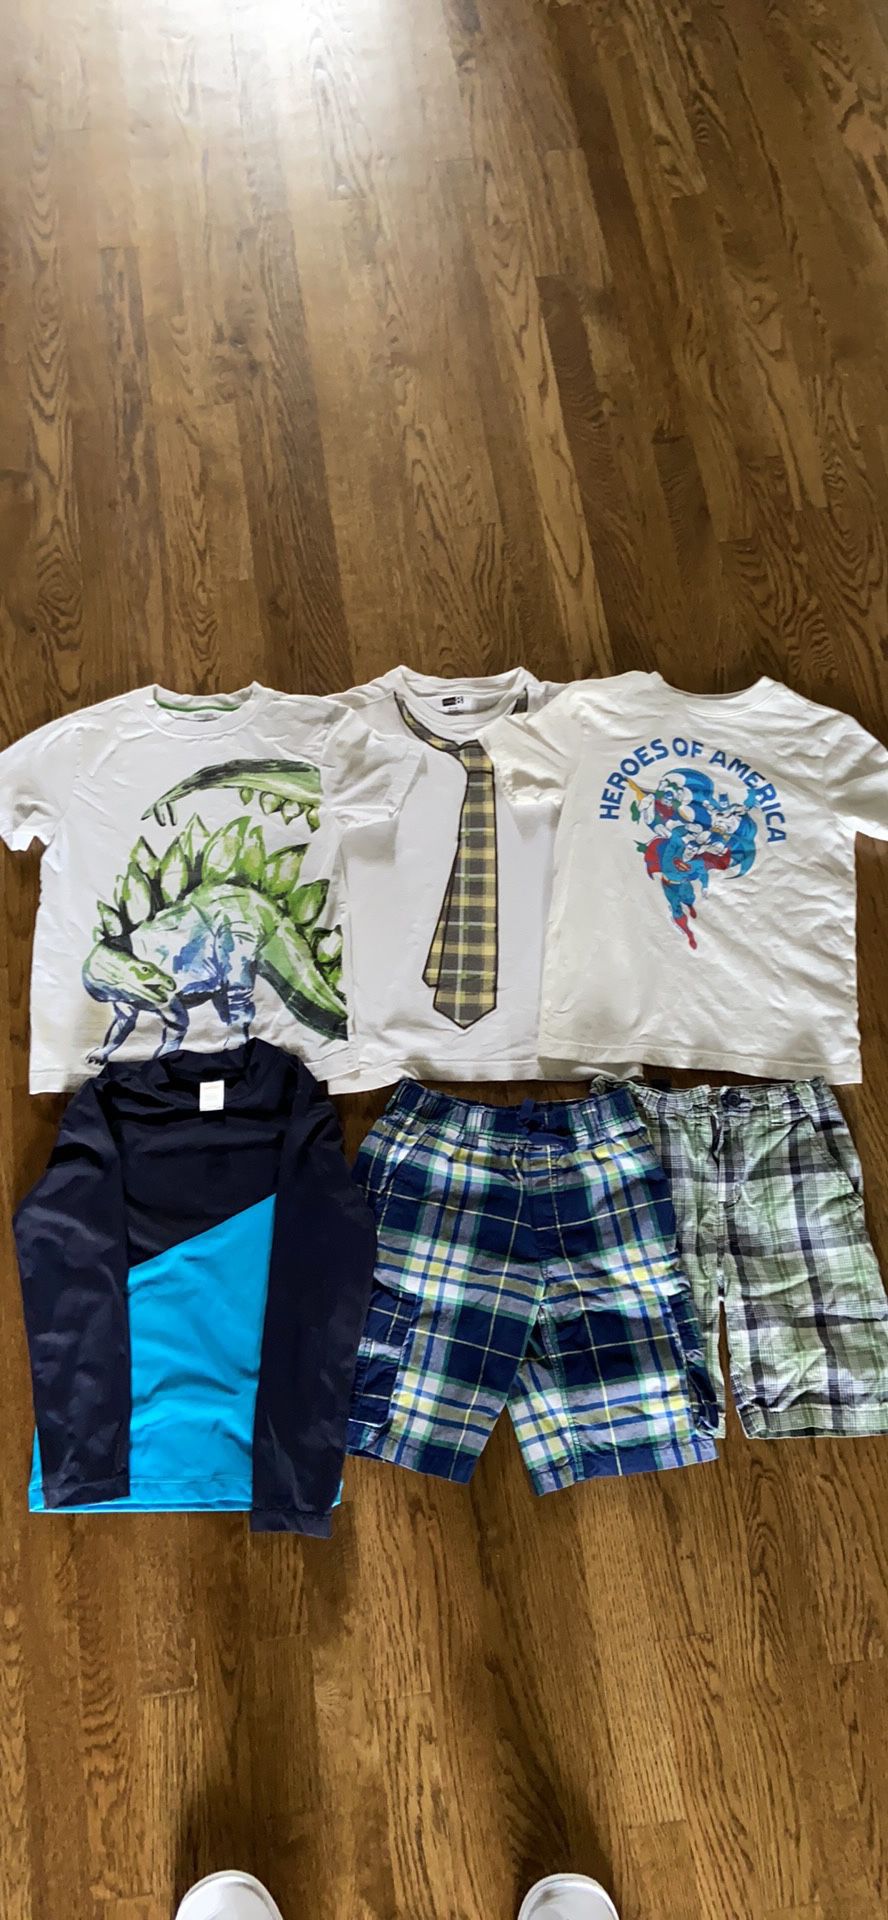 Gymboree/Crazy 8 Clothes for 7/8 year old boy